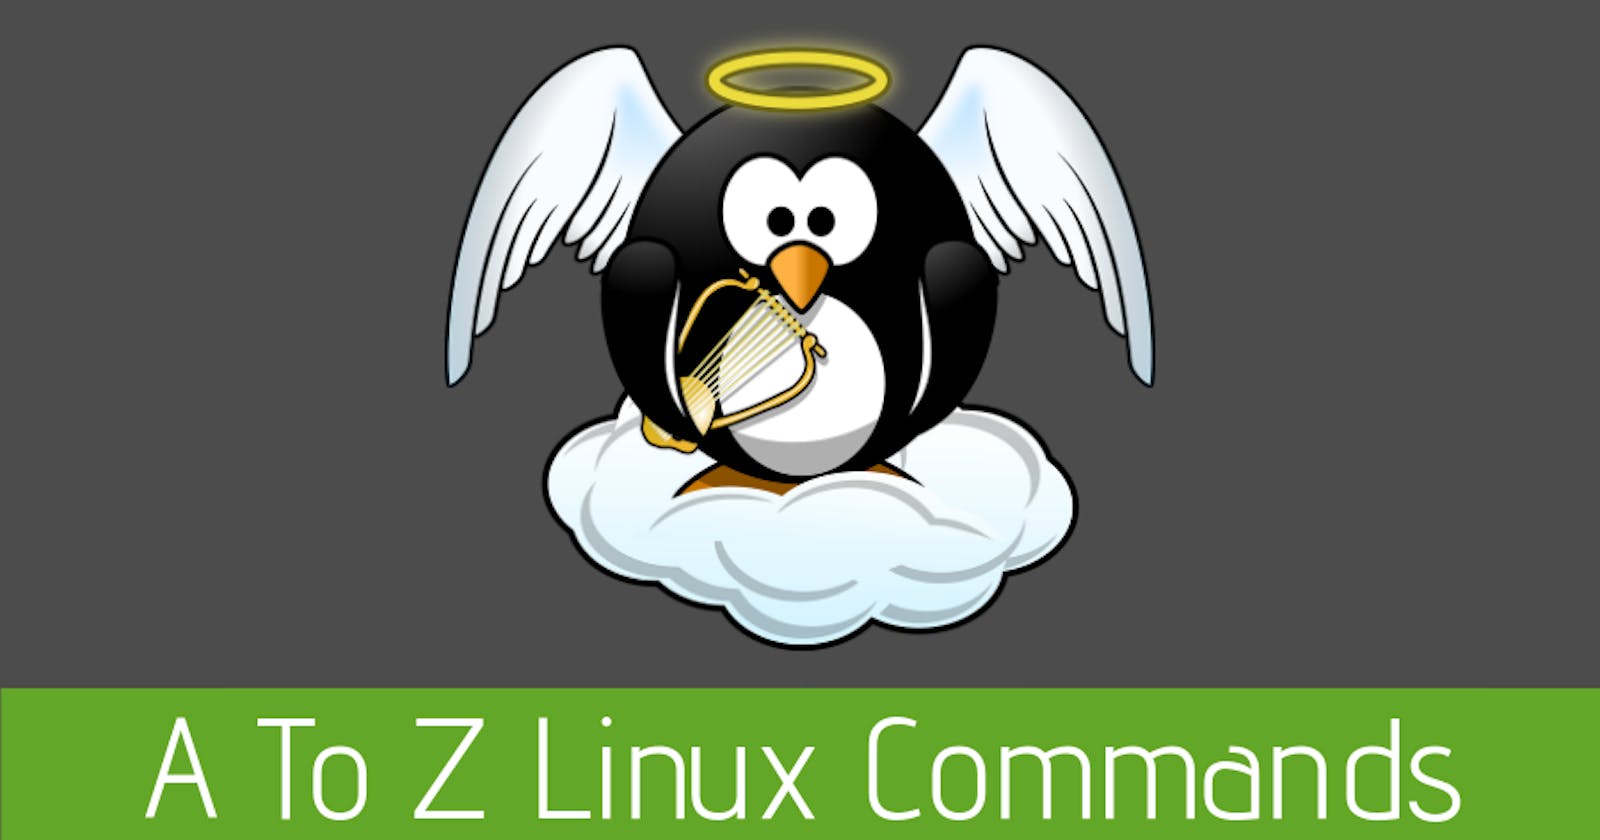 Powerful Linux Commands to make you a Linux Wizard